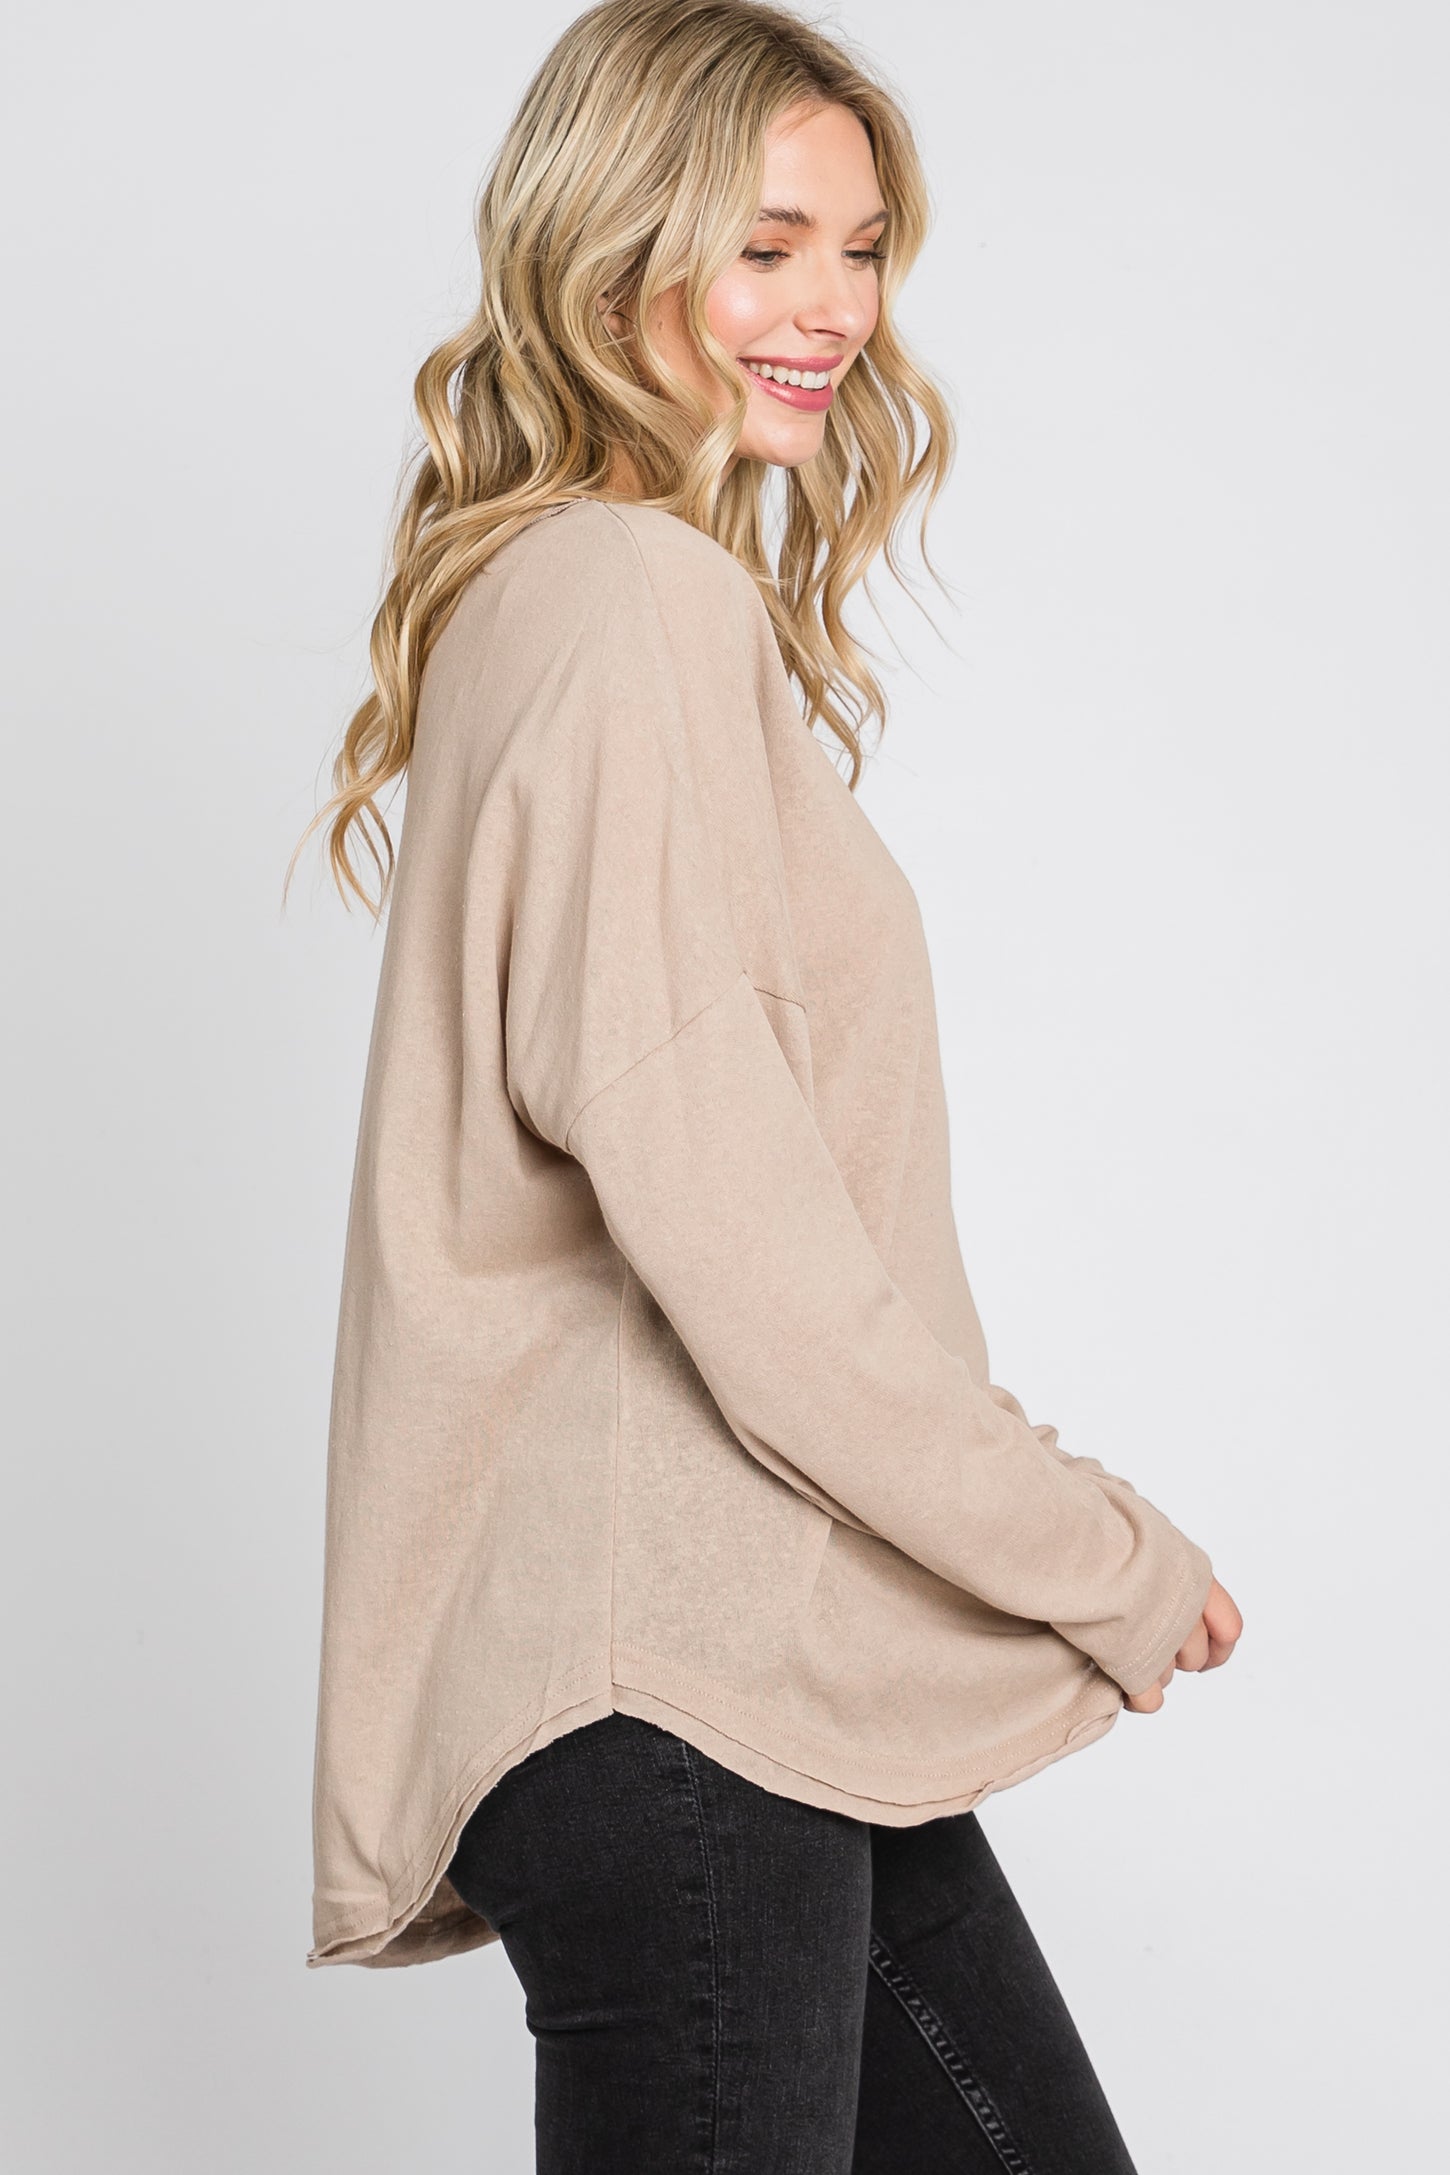 Taupe Button Front Raw Edge Top